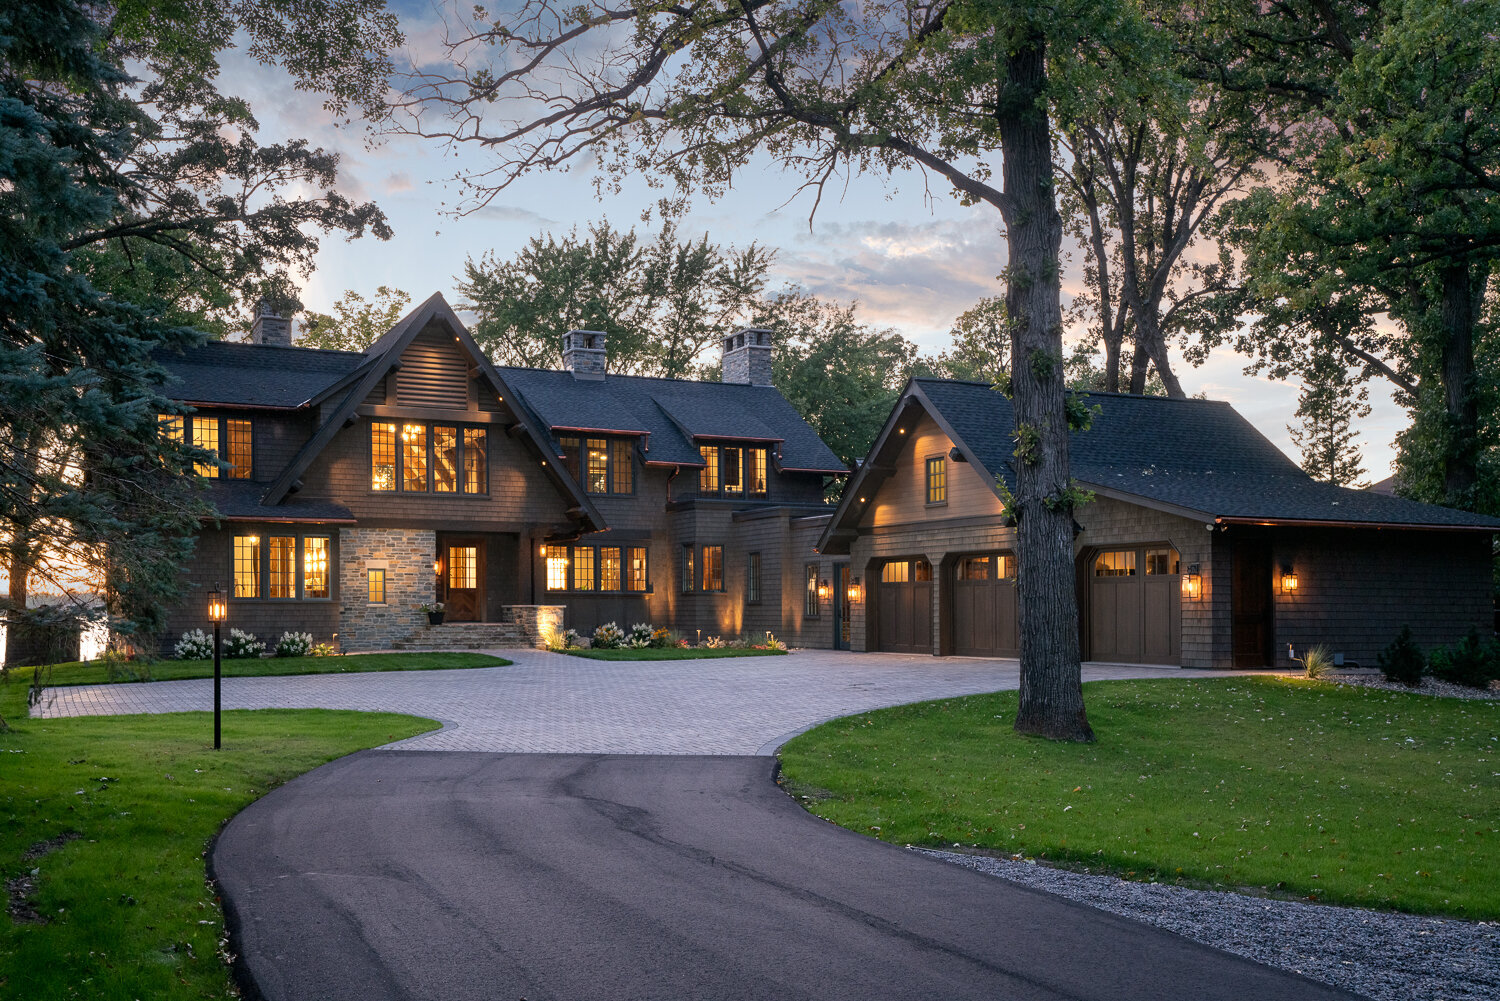 Evening architectural photograph of a lake home